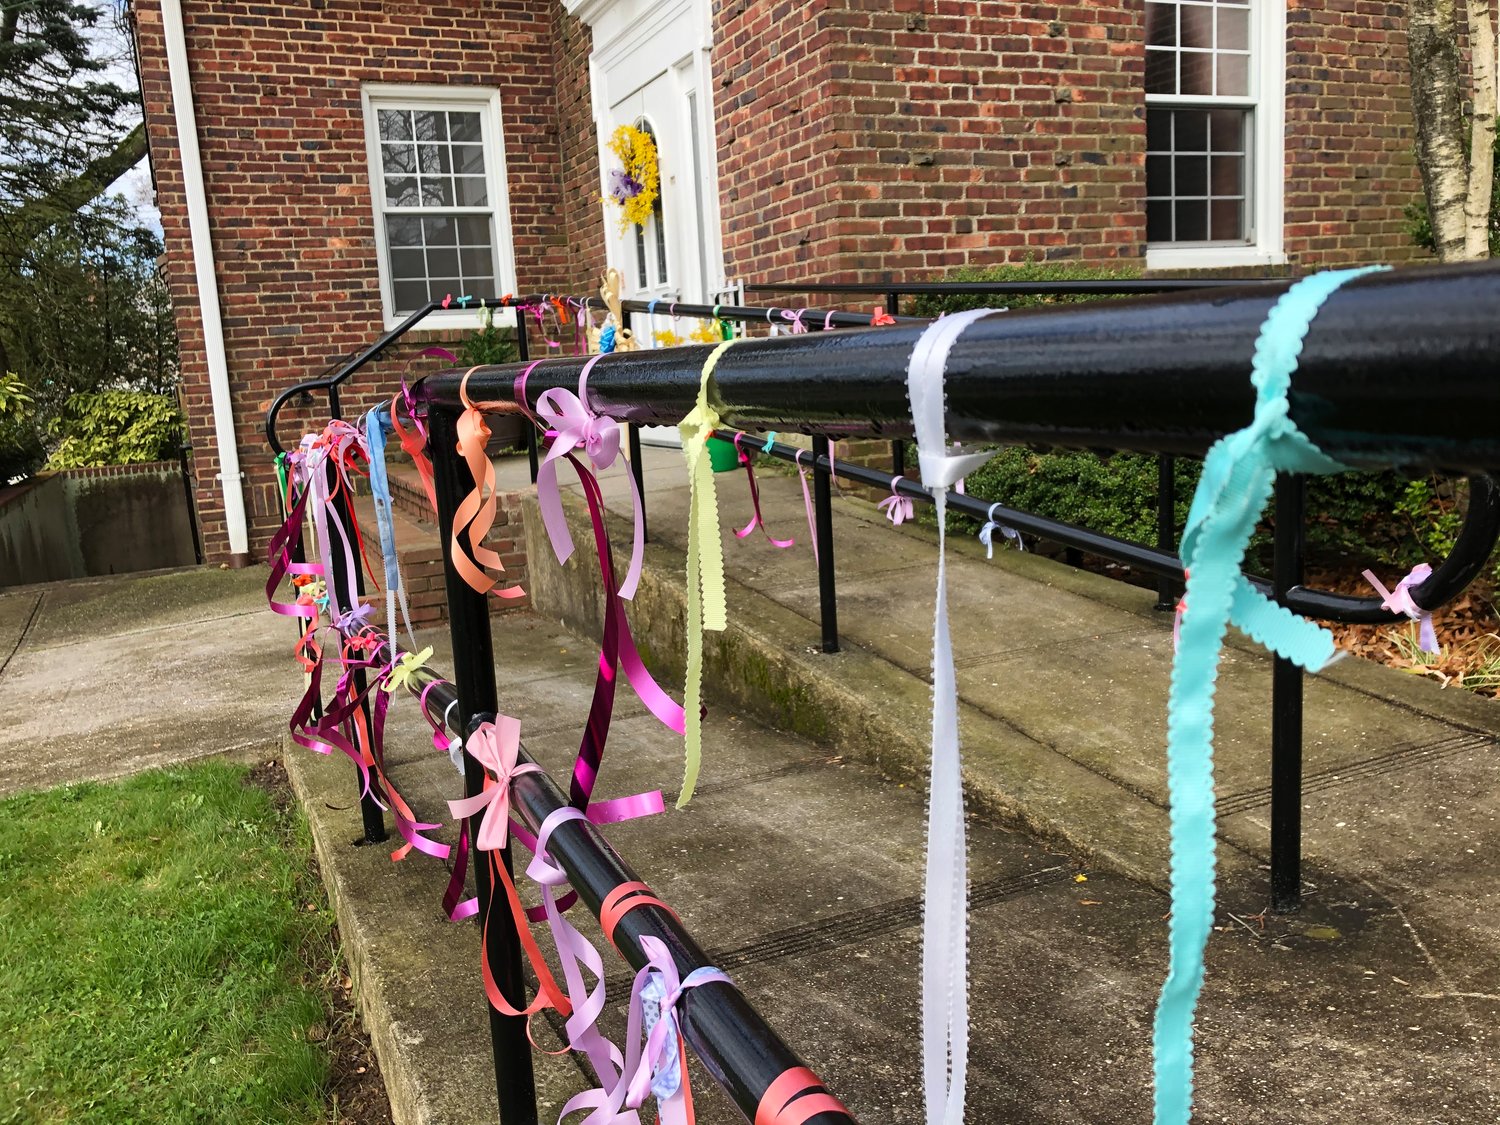 tHE COMMUNITY pRESBYTERIAN Church of Merrick has asked congregants to hang pastel-covered ribbons outside their homes as a message of hope.